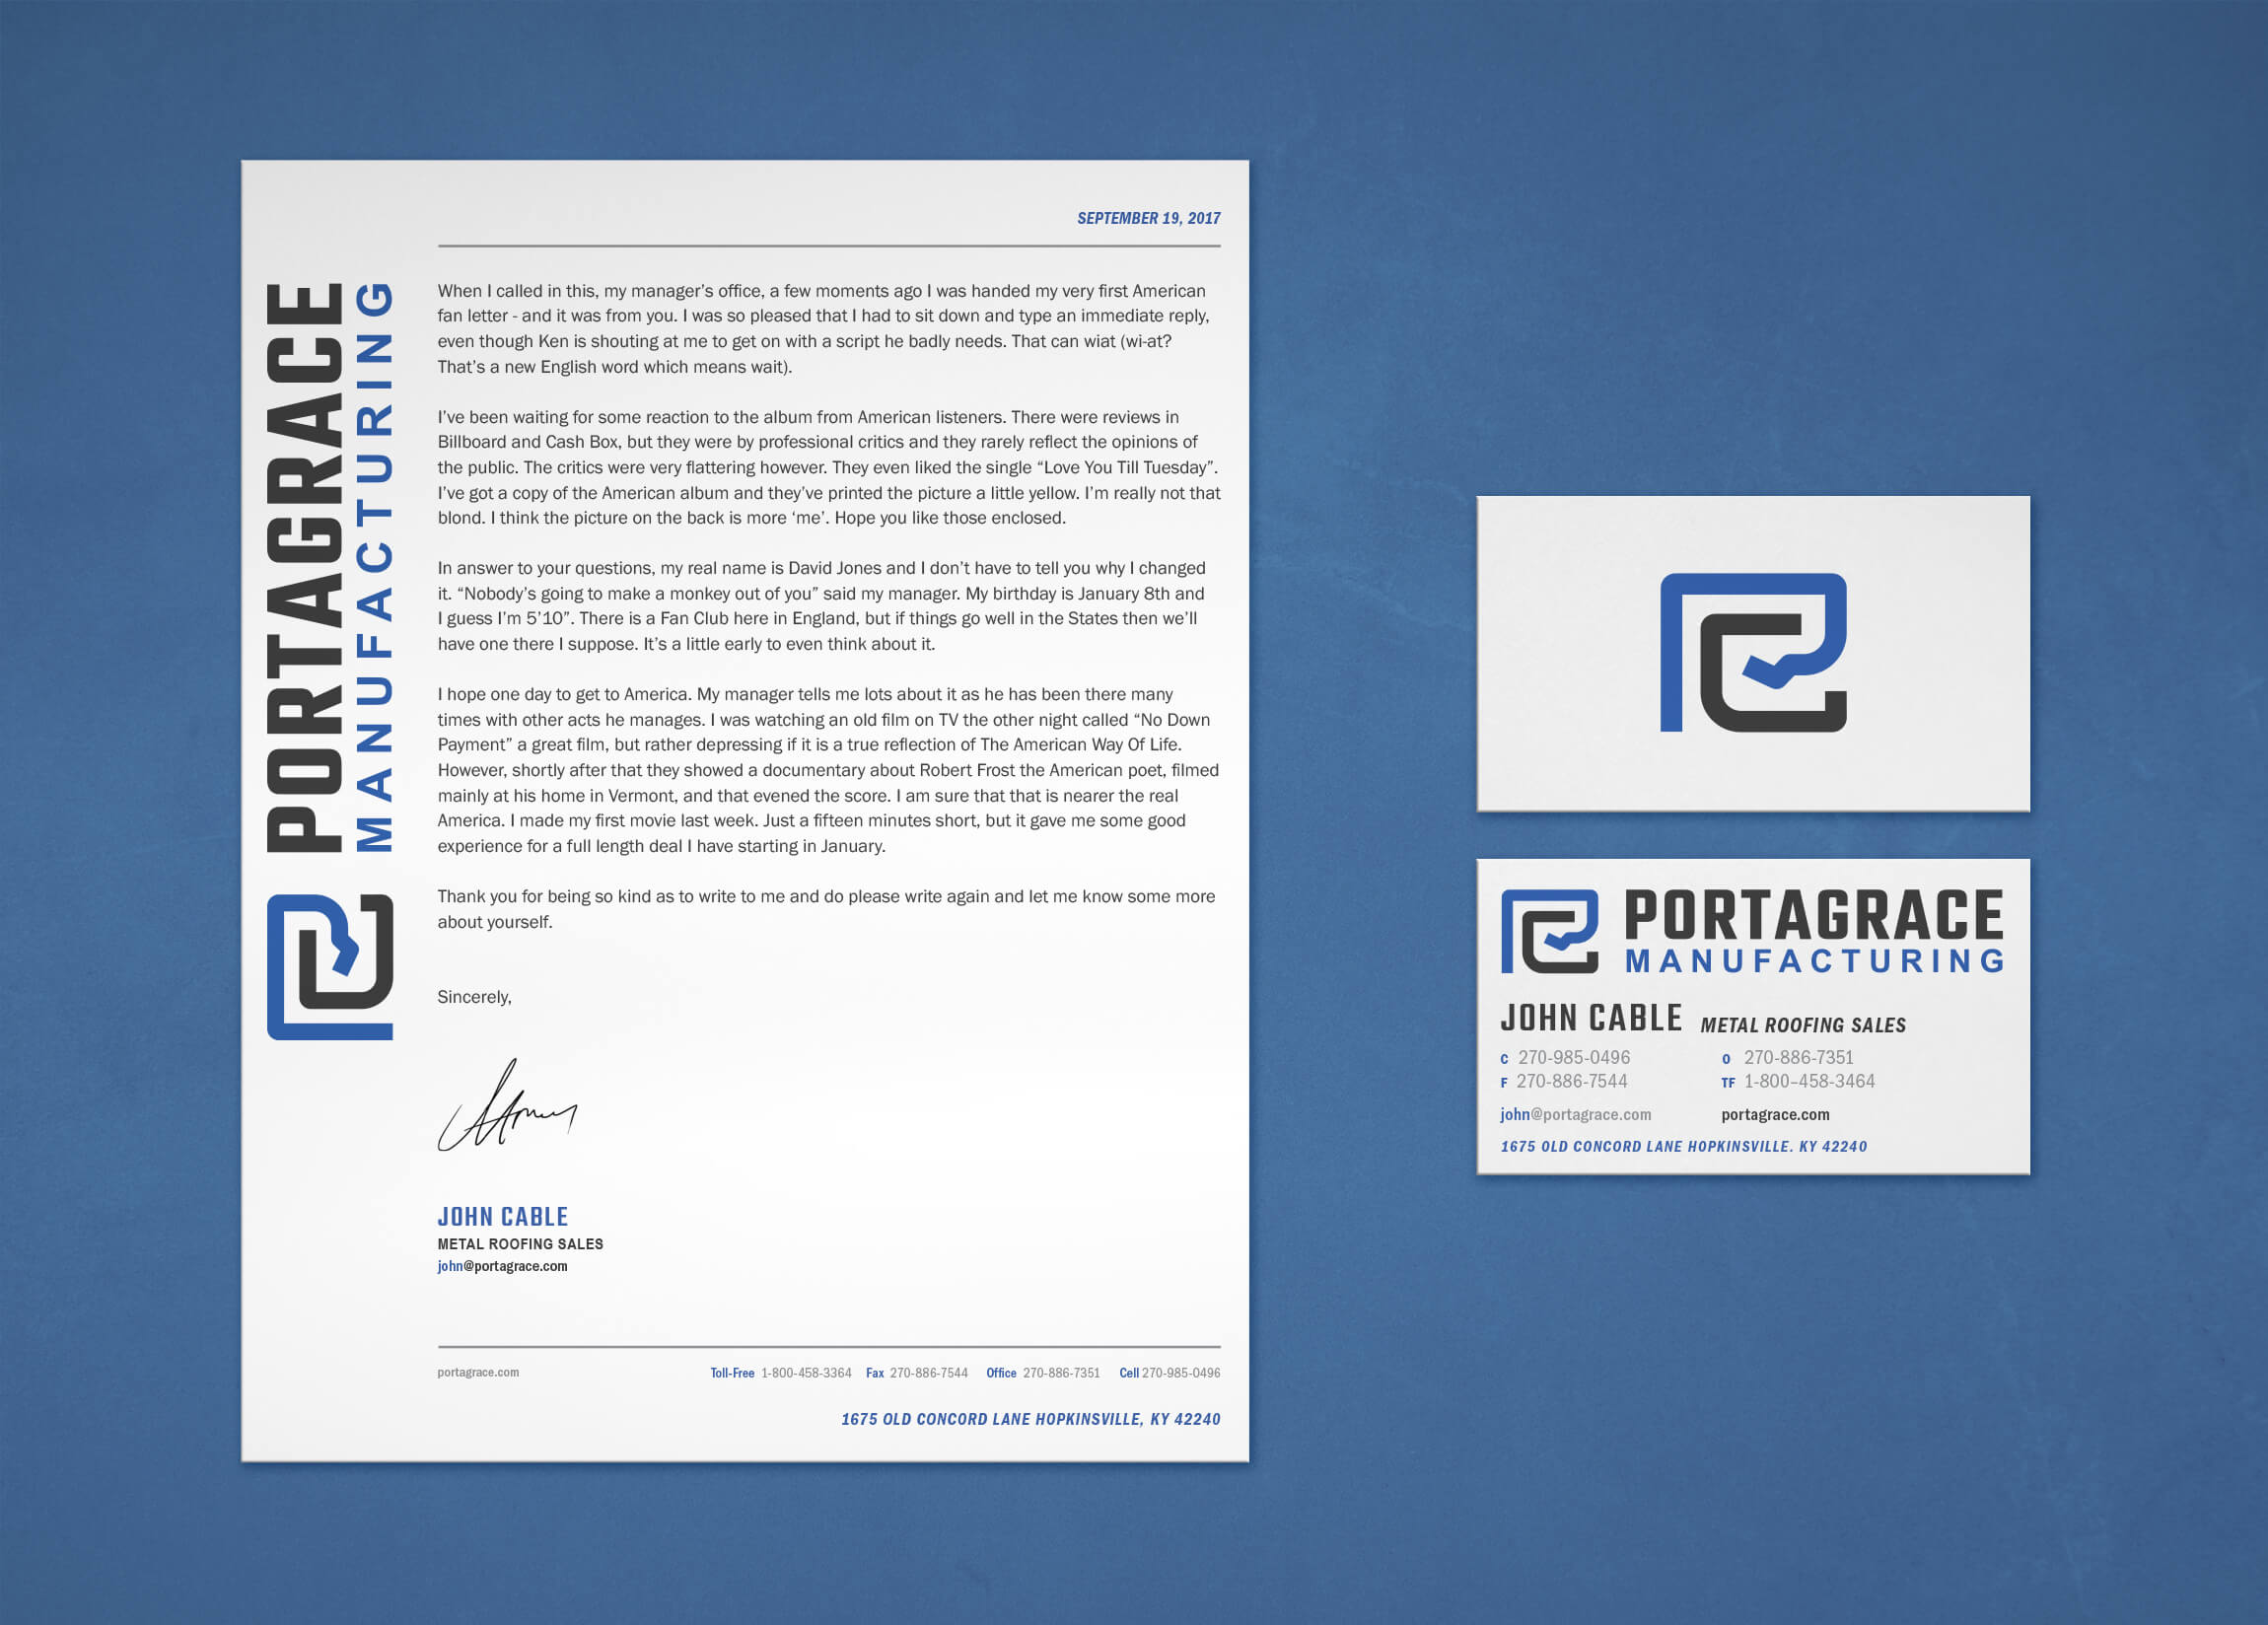 Stationary business card and letterhead designs for PortaGrace Manufacturing